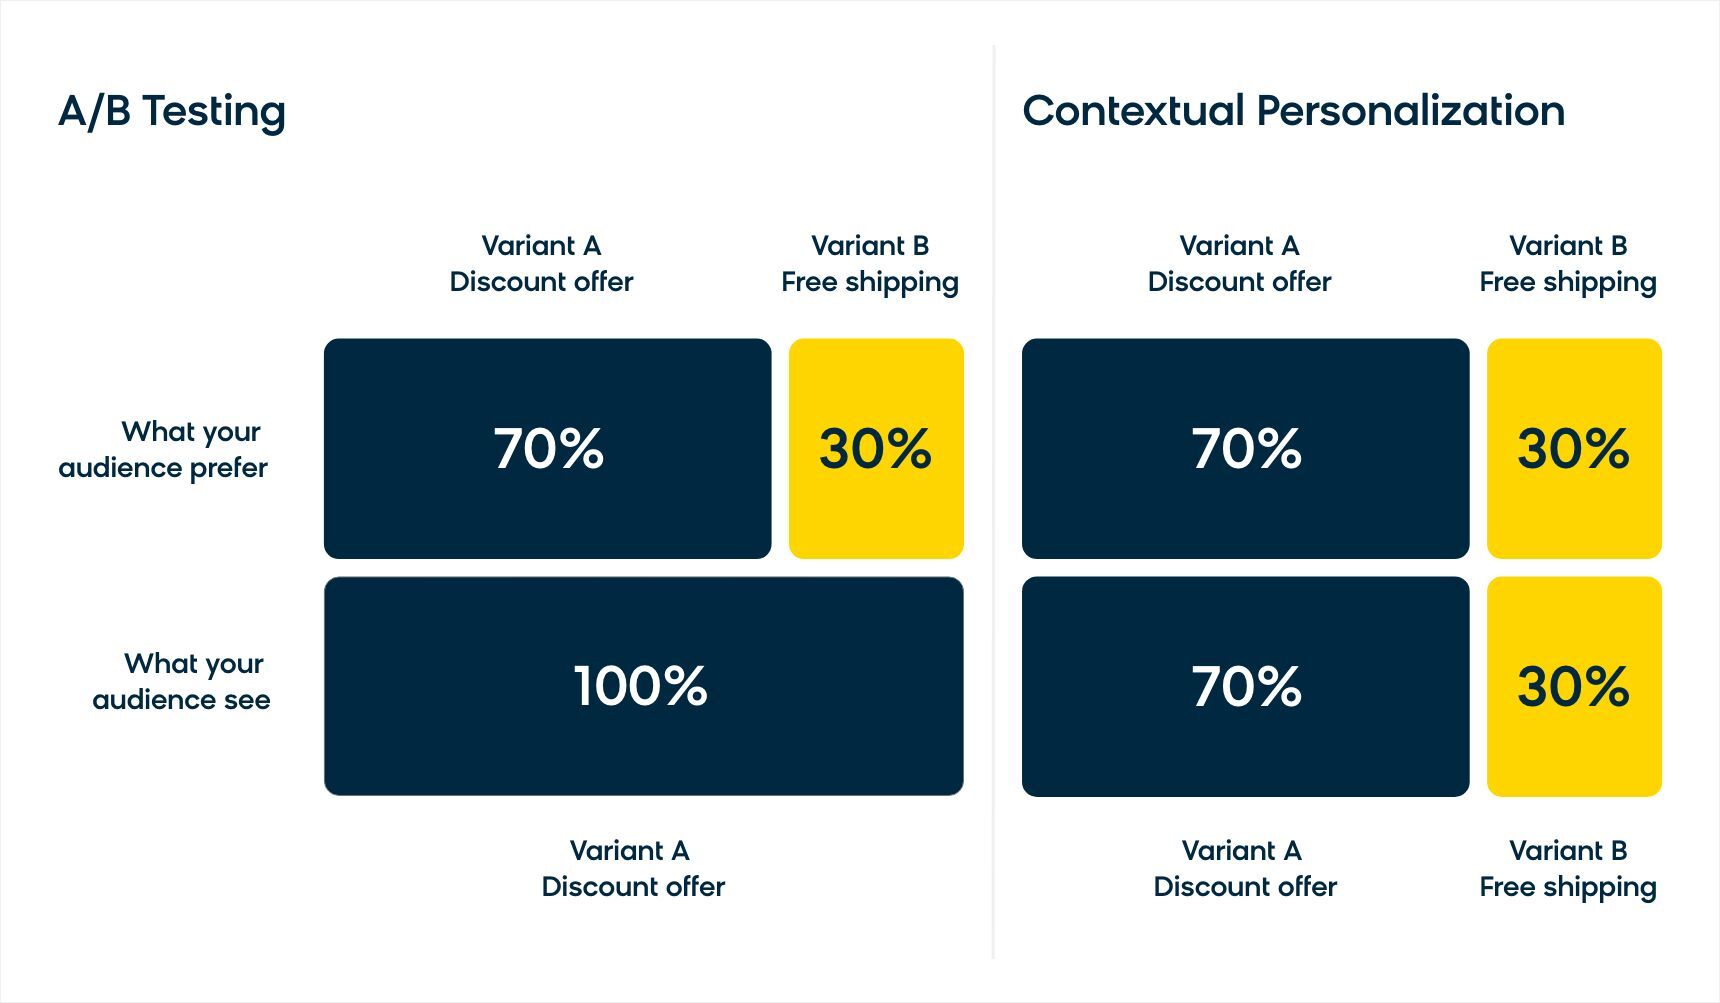 A graphic representing the discrepancy between traditional A/B testing and contextual personalization